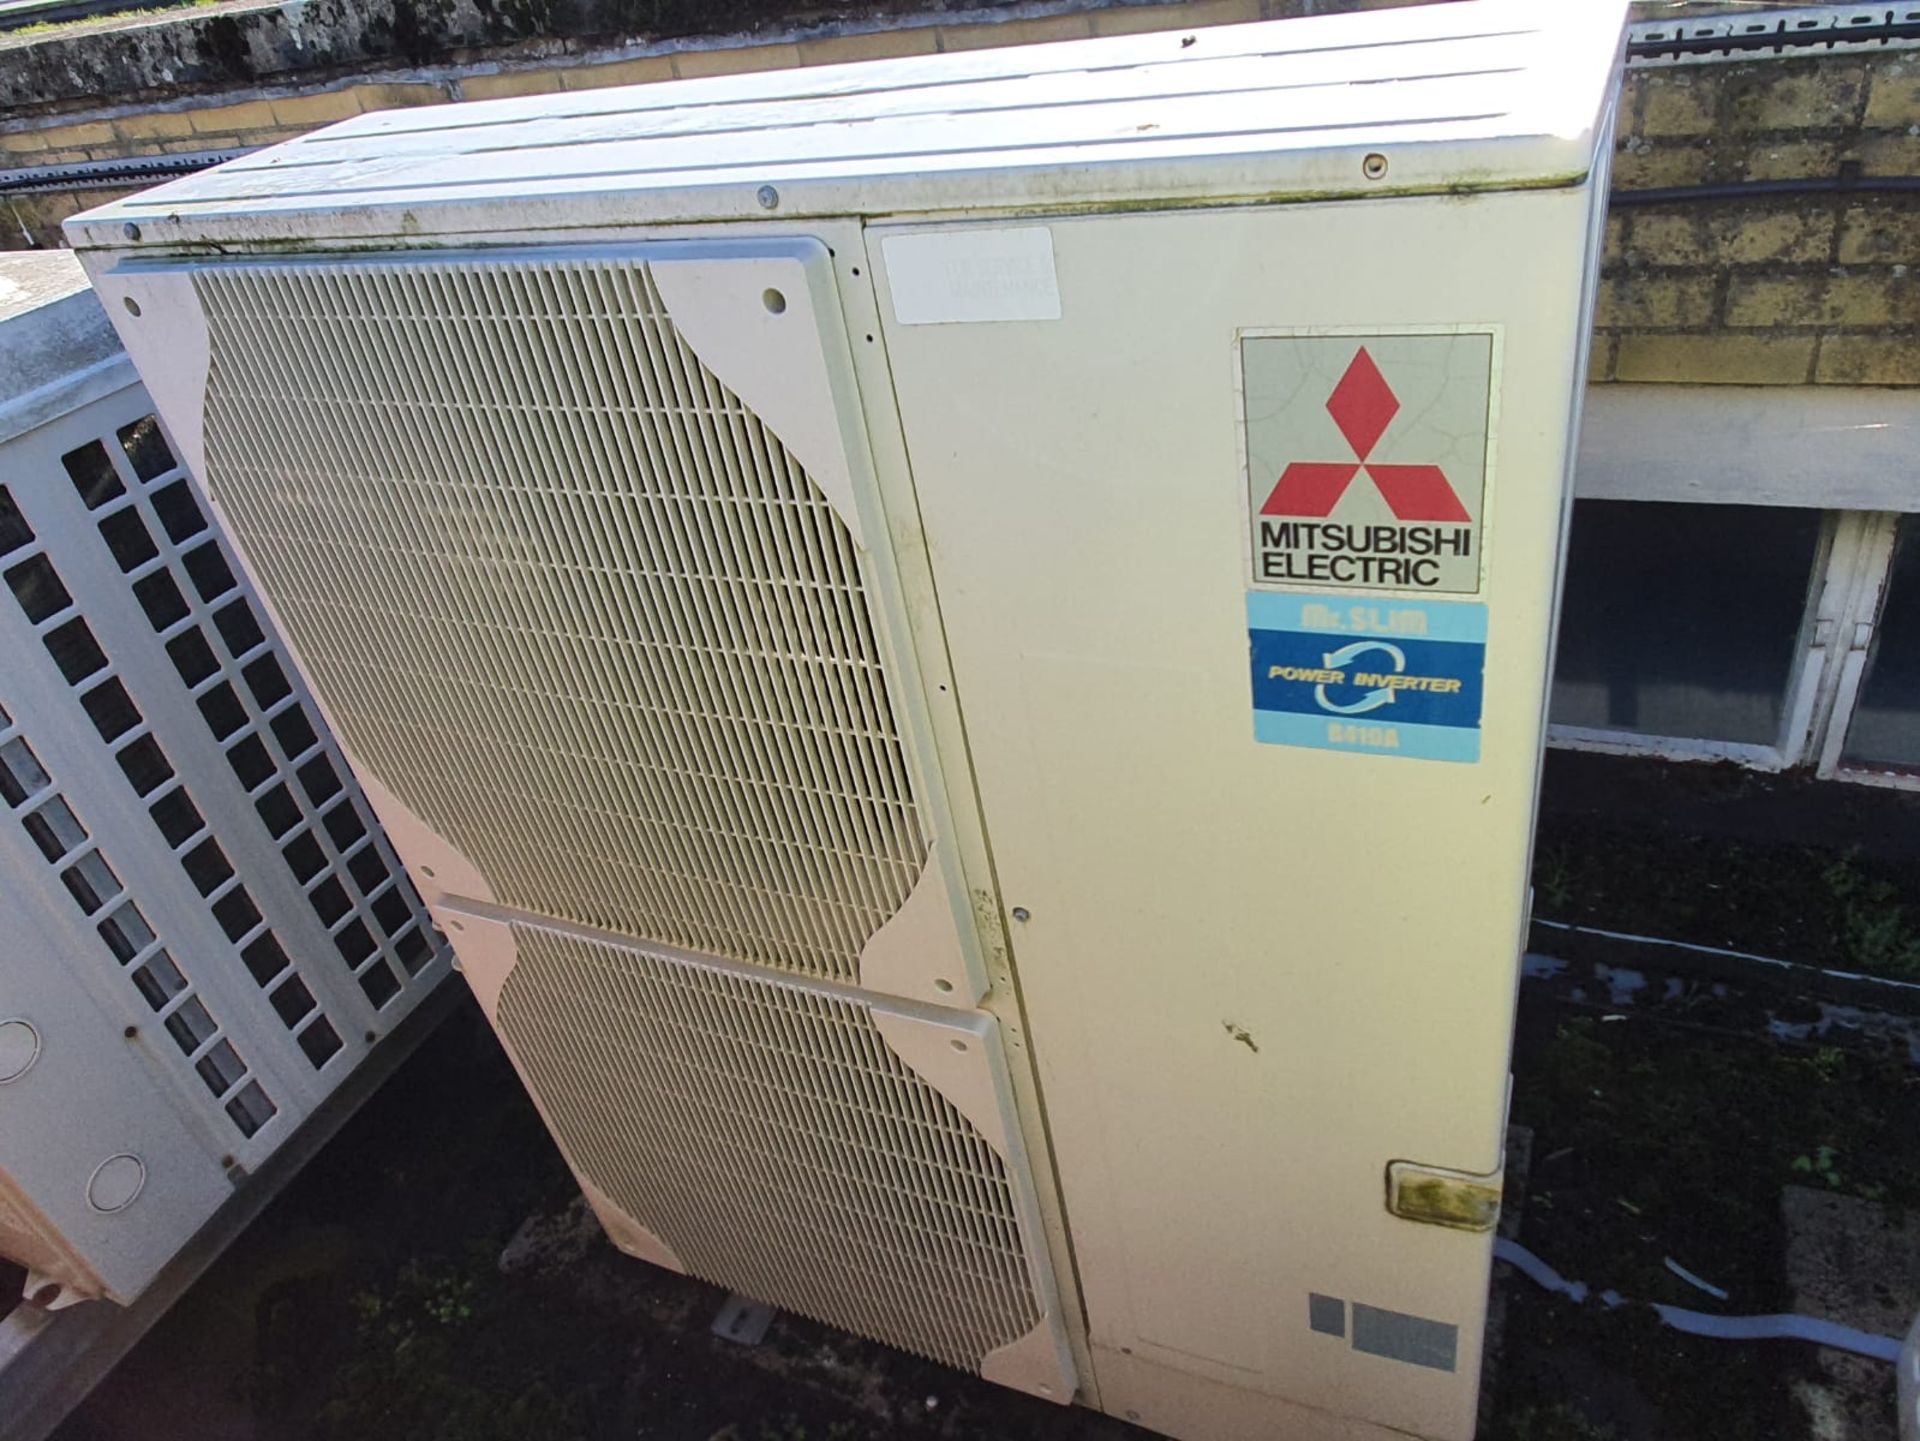 9 x Assorted Outdoor Rooftop AC Air Conditioner Units - Brands Include Daikin and Mitsubishi - CL483 - Image 8 of 21